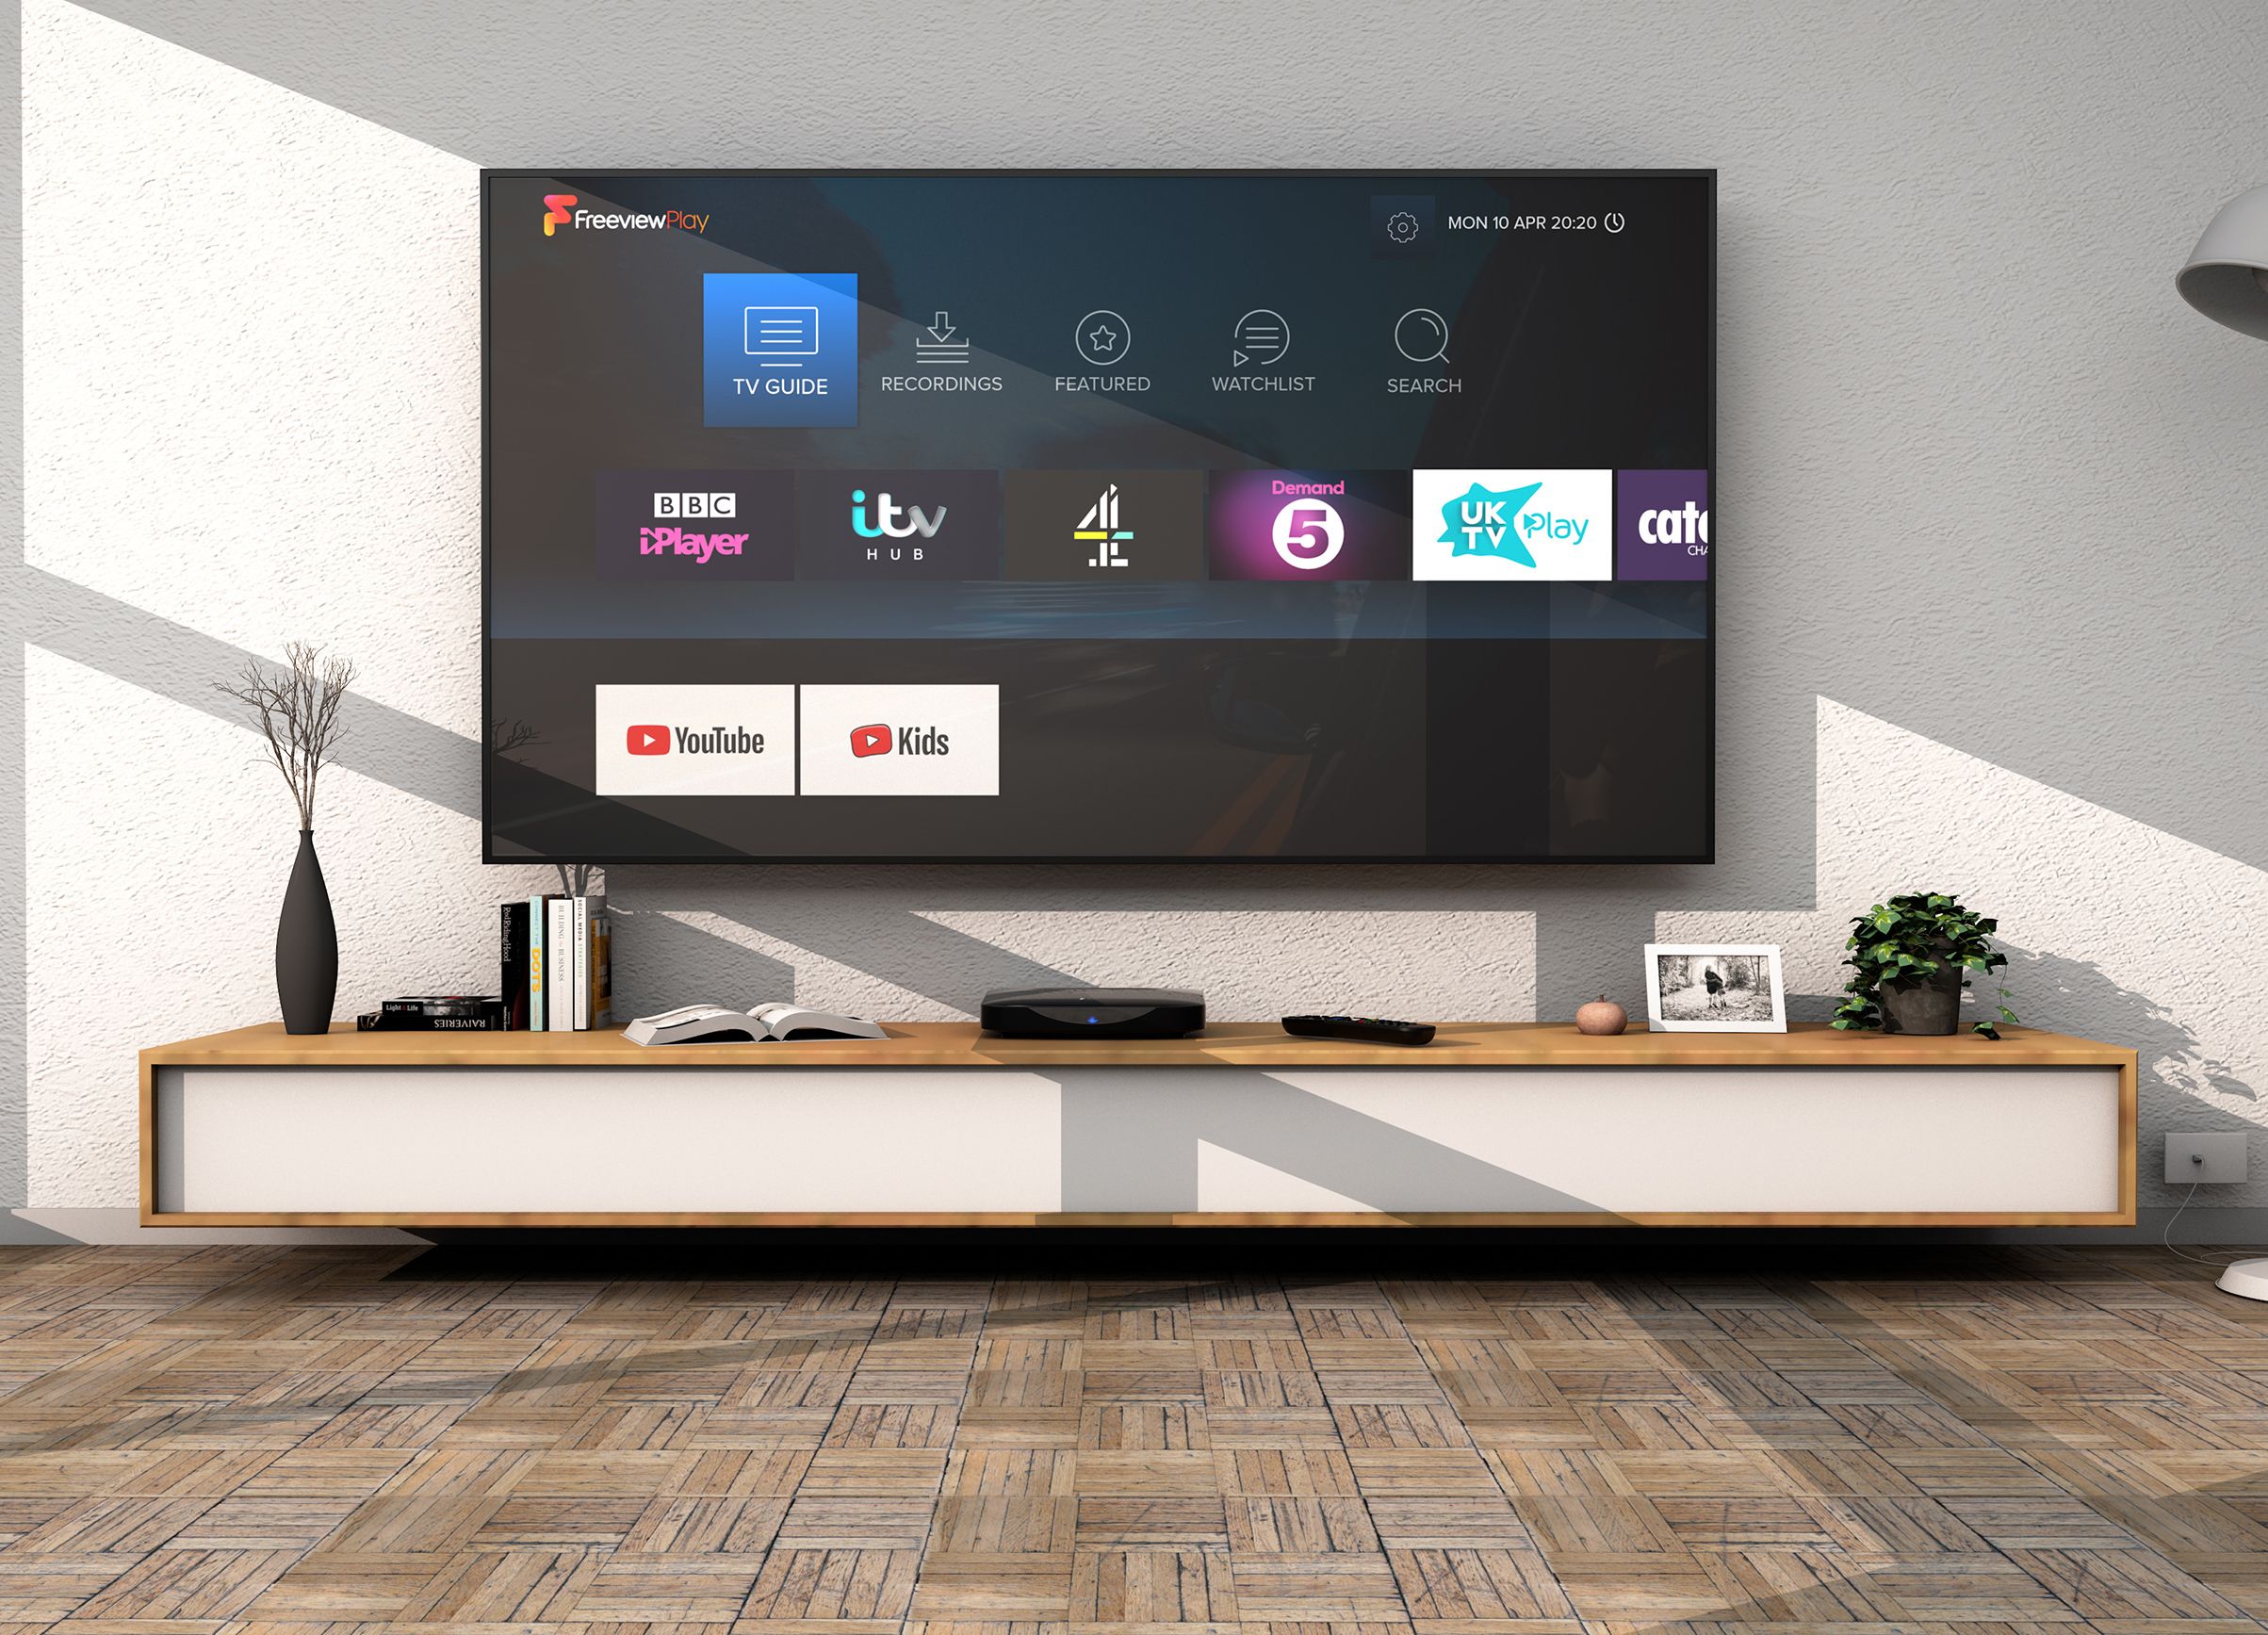 UK-based Manhattan has a new £170 4K Freeview Play recorder image 1